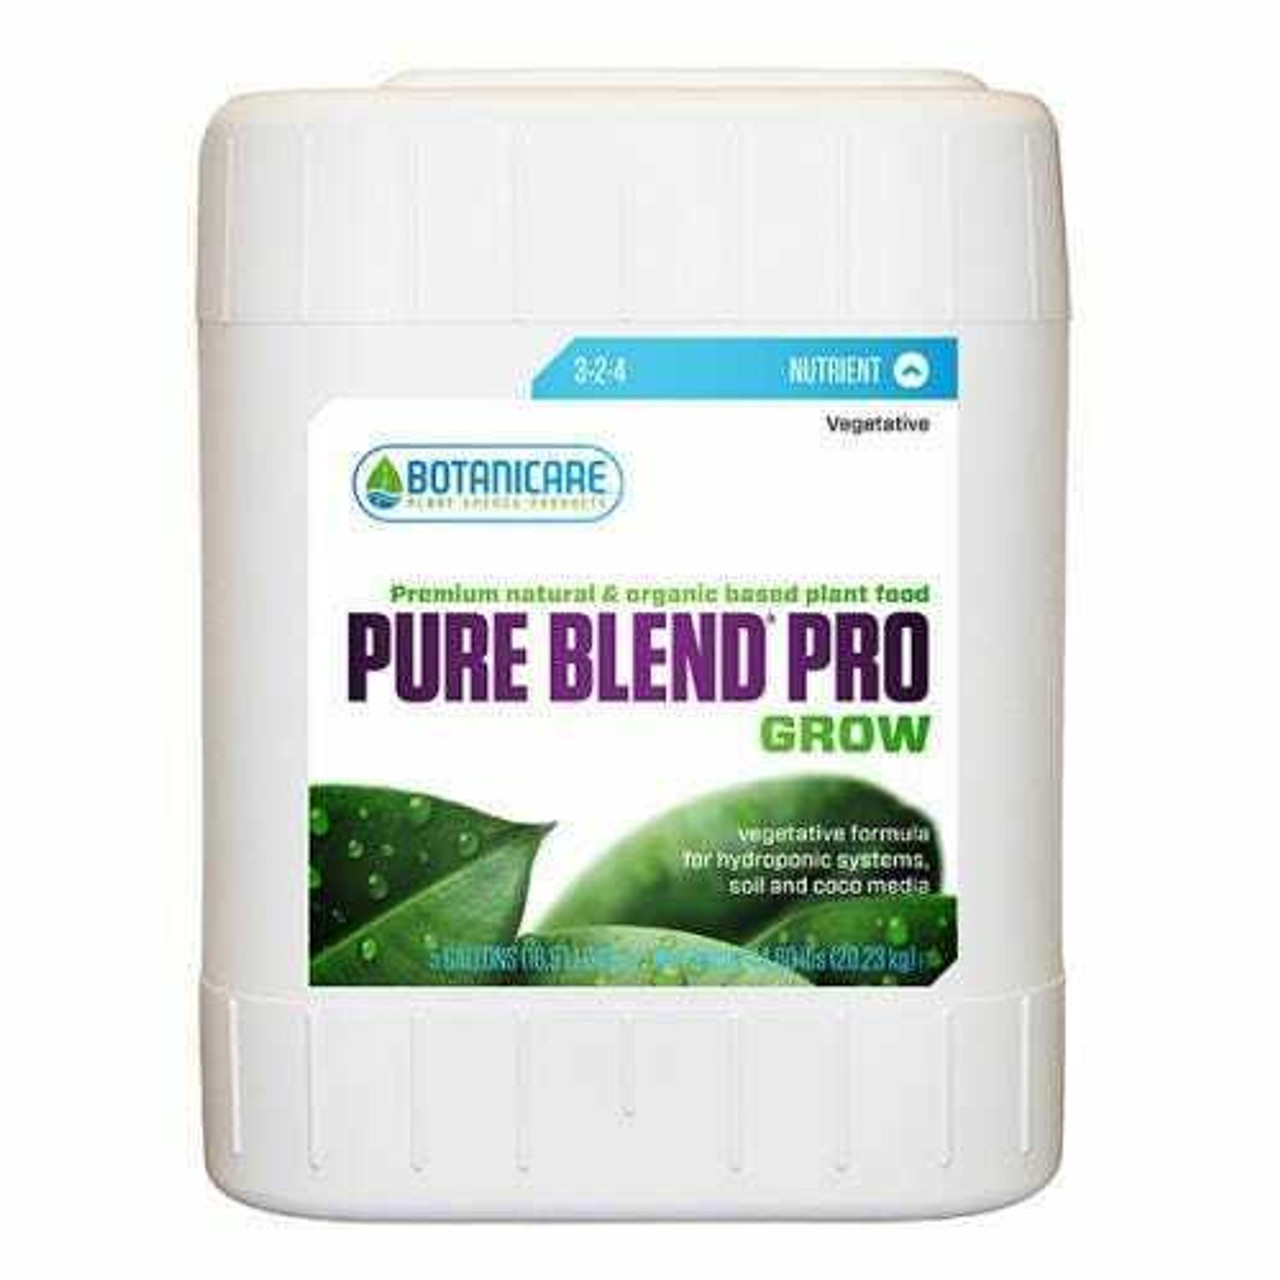 Botanicare Pure Blend Pro Grow 5 Gallon (Freight/In-Store Pickup Only)